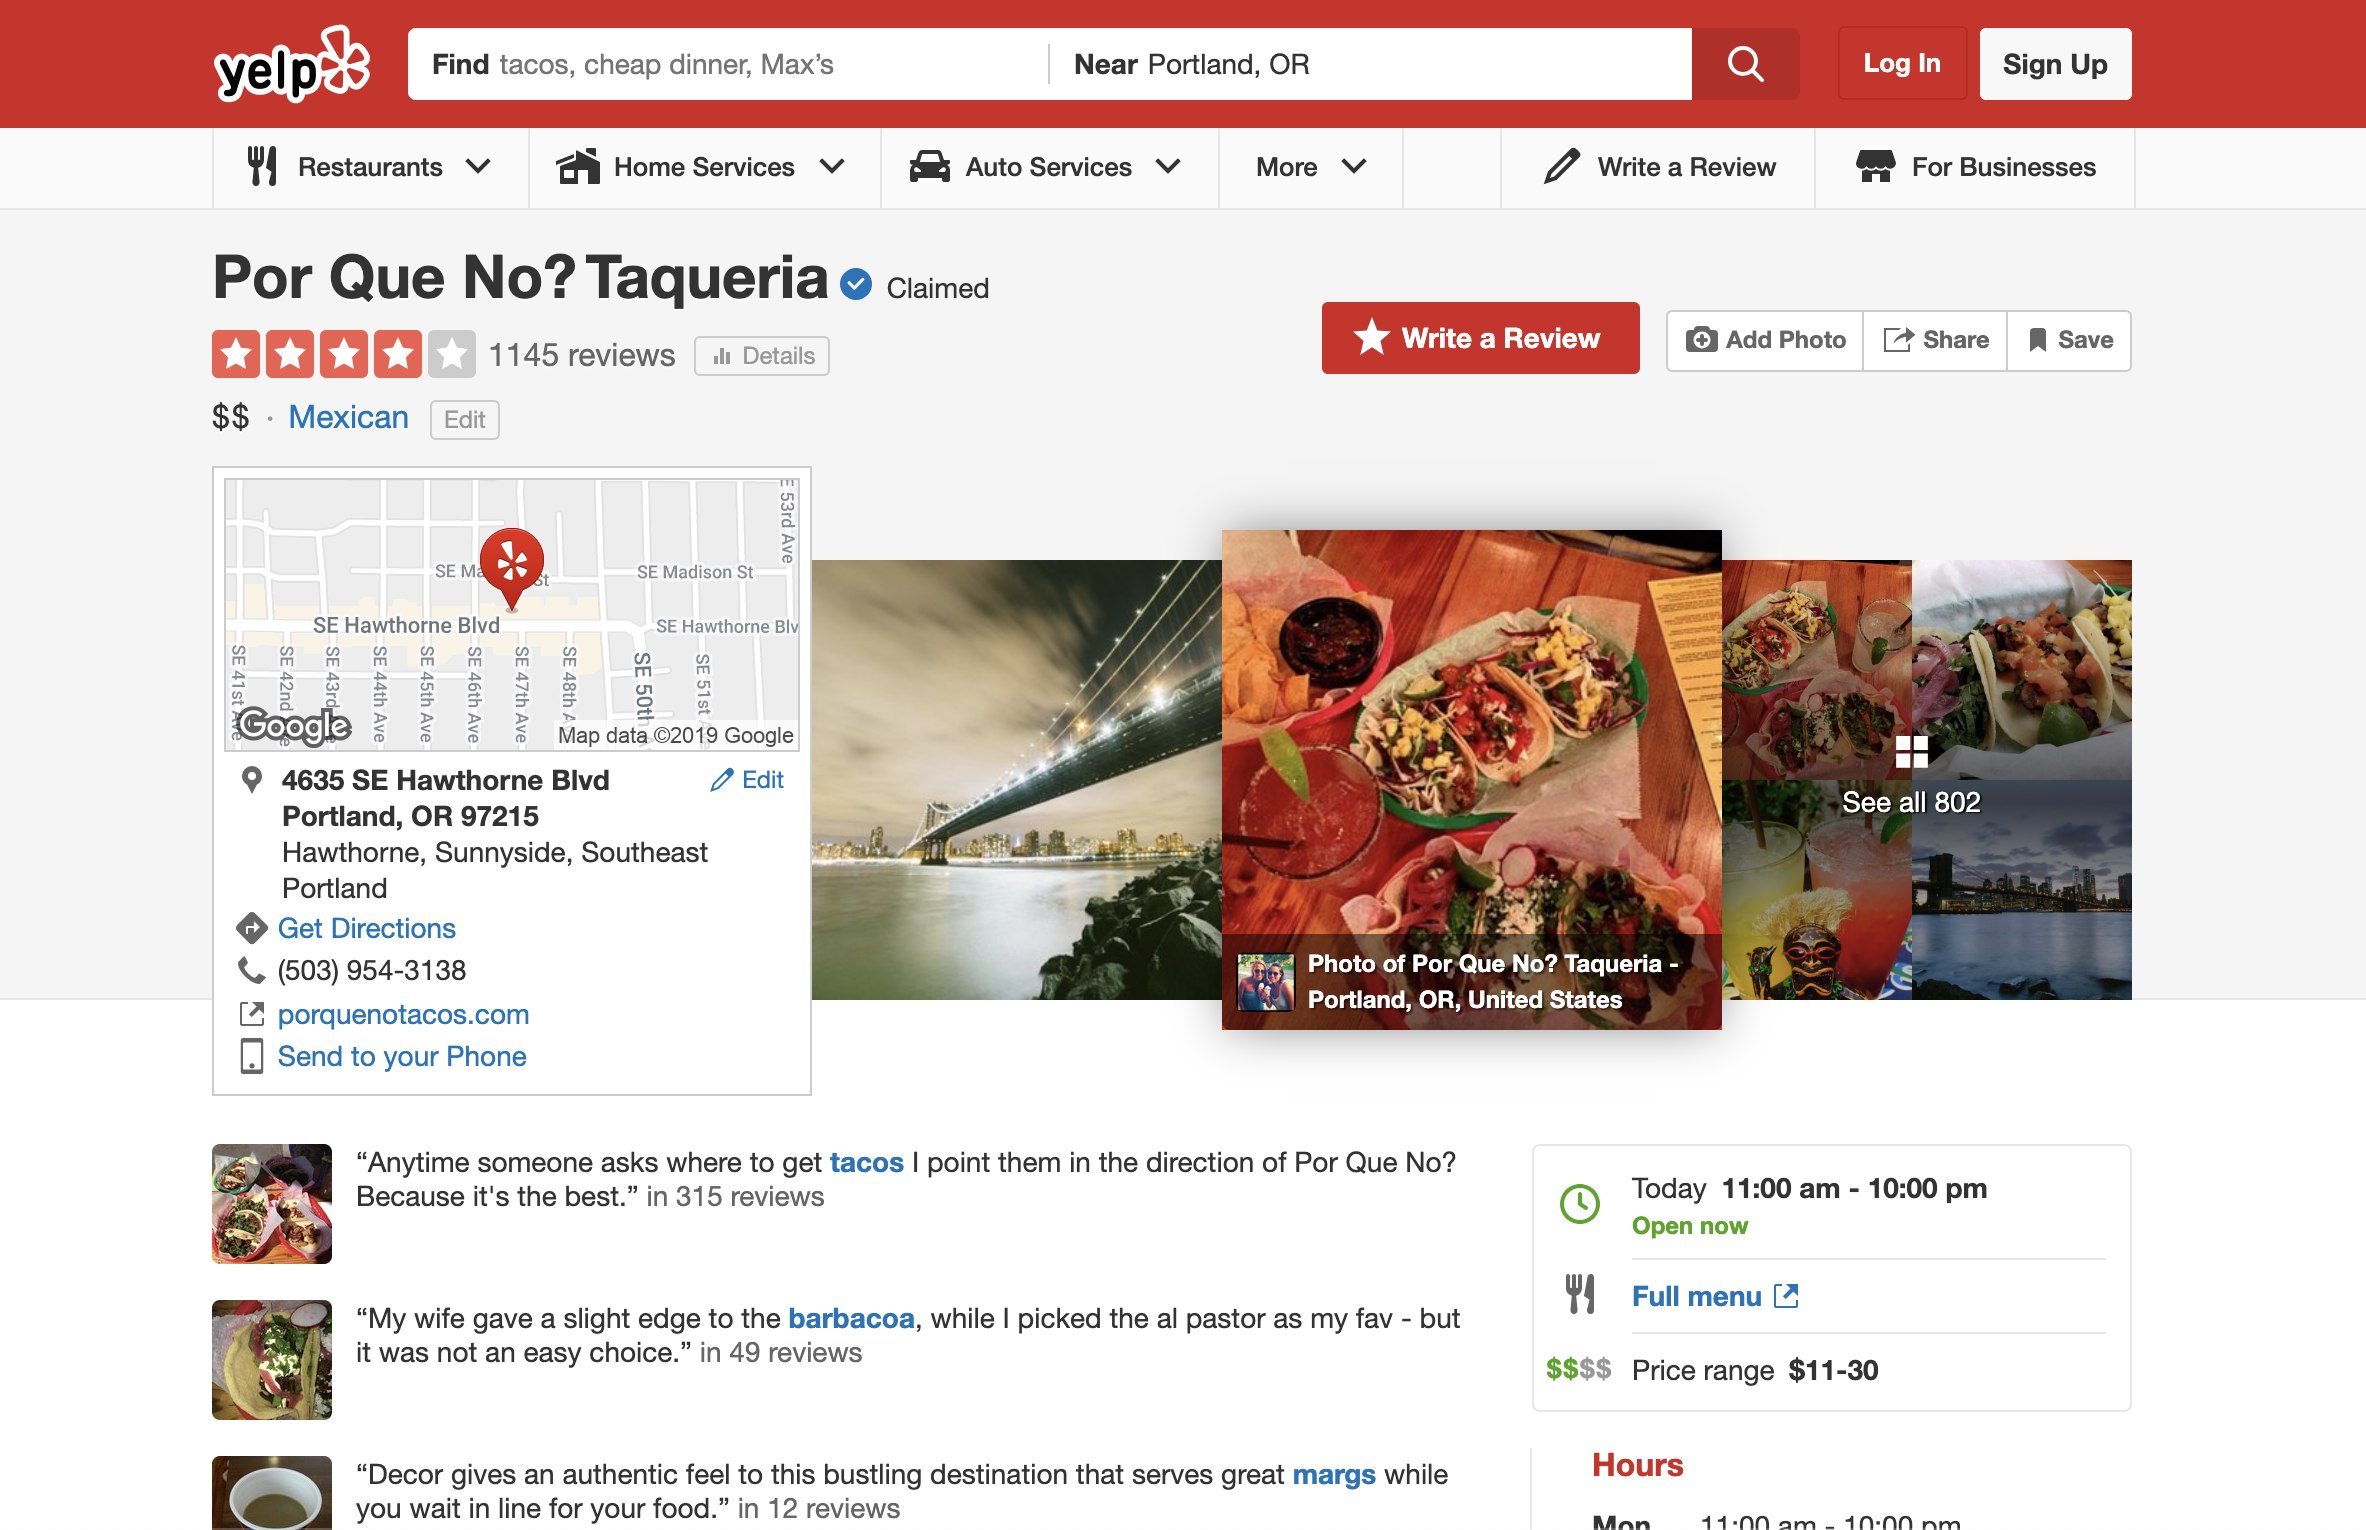 Yelp page of a mexican restaurant with pictures of food, location and contact details, with positive feedback from the customers. 